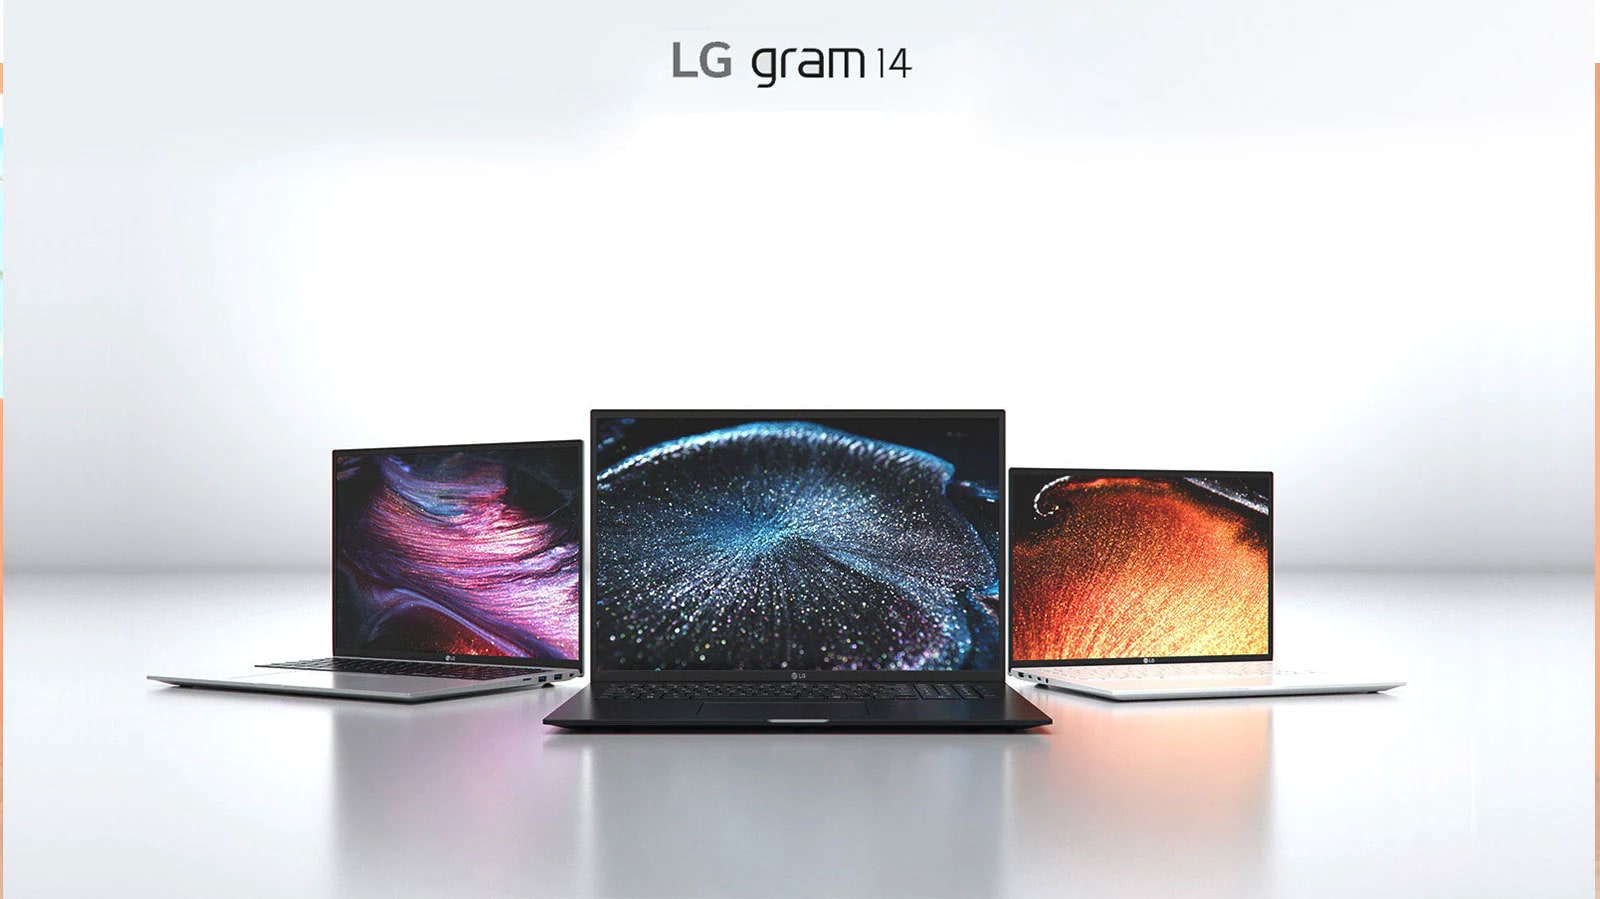 LG gram 14 offering all features including light-weight as ever